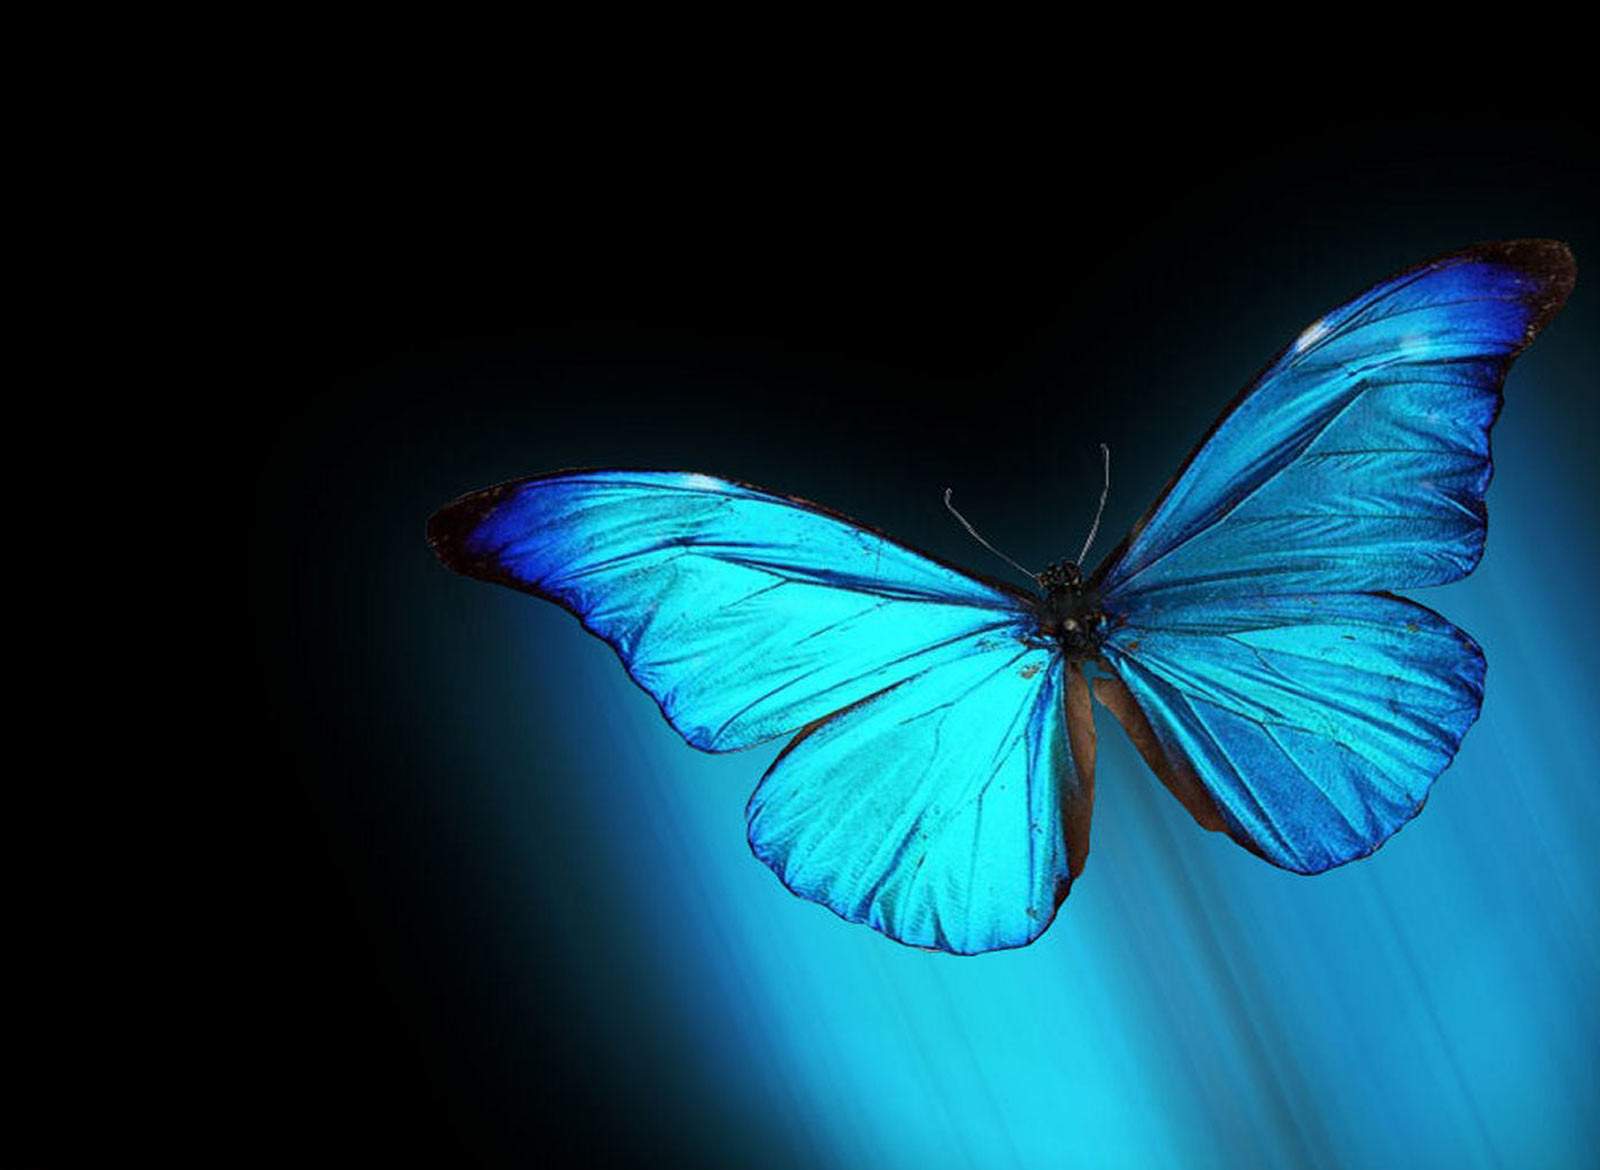 imagenes hd wallpaper,butterfly,insect,blue,moths and butterflies,nature